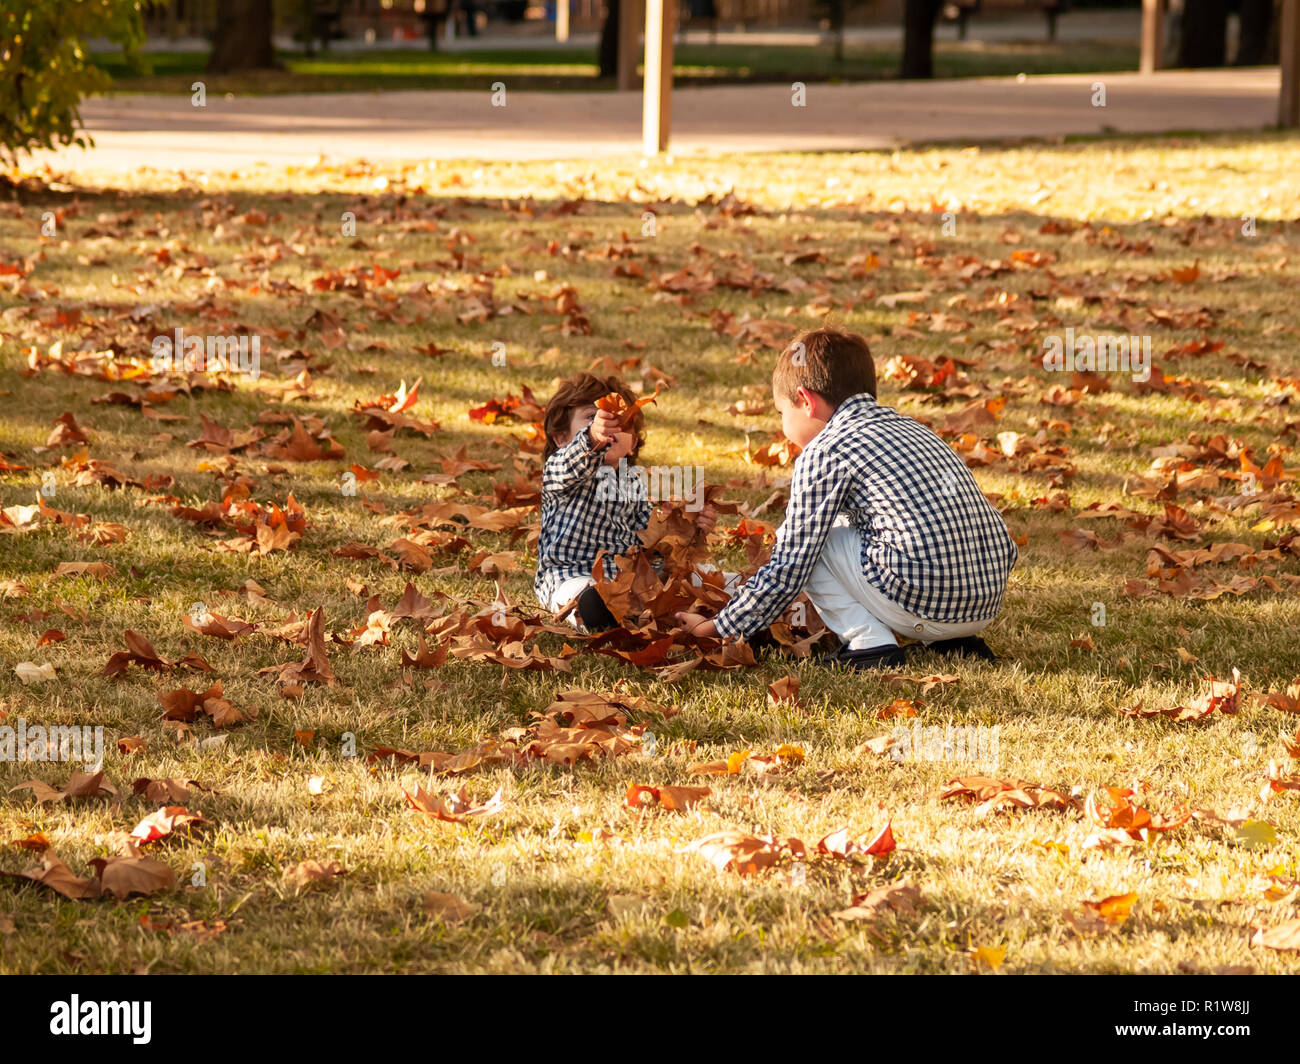 Two brother boys playing with the leaves of the trees fallen on the ground in a park in autumn Stock Photo